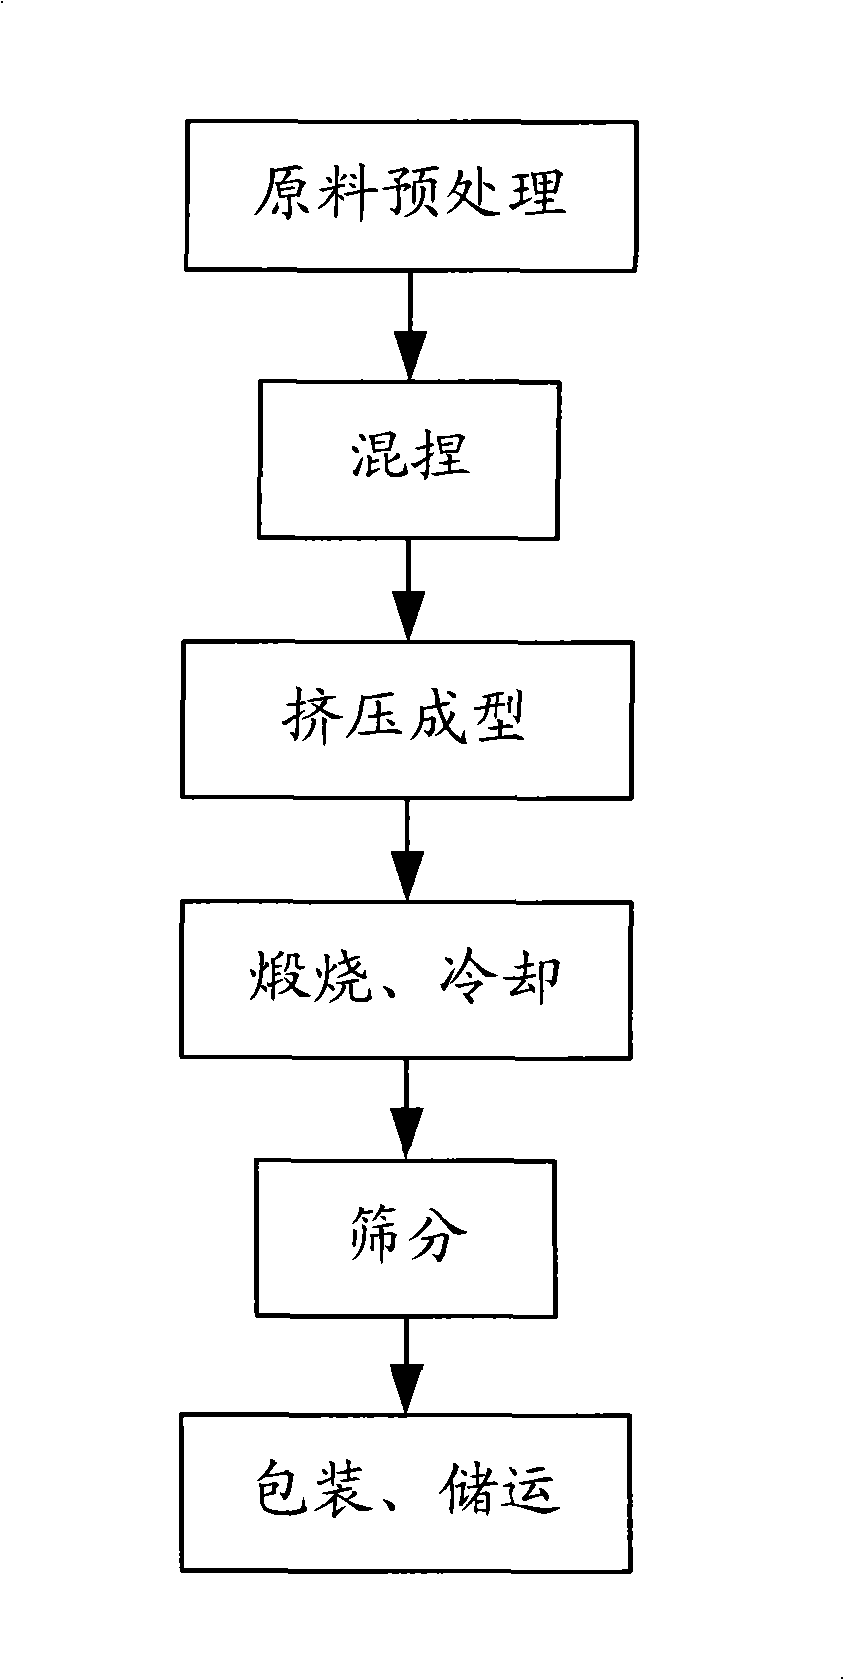 Method for producing calcined coke by pot type furnace